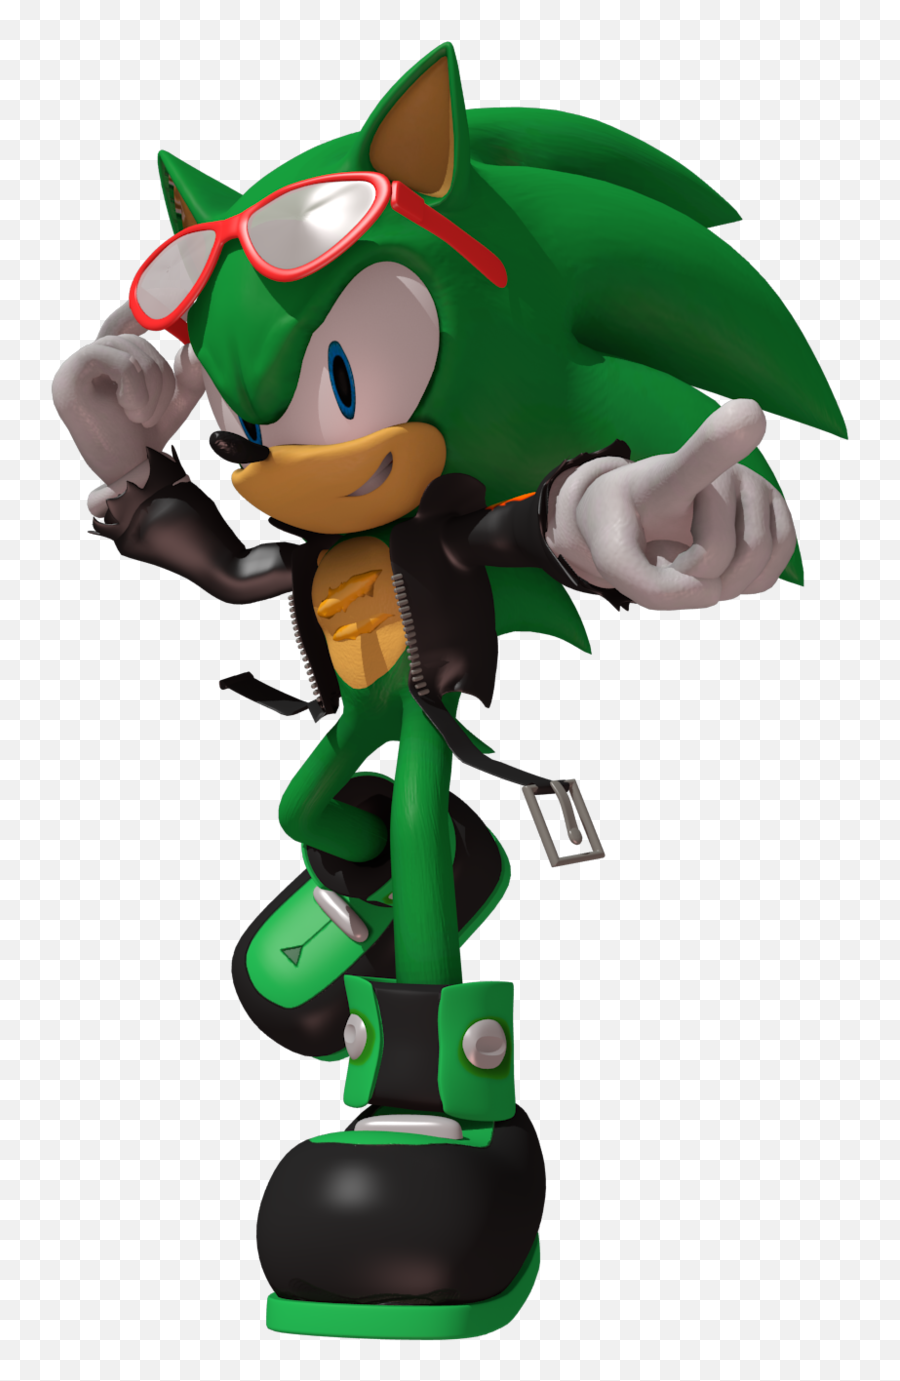 Scourge The Hedgehog Render Png Image - Scourge The Hedgehog Render,Scourge Icon